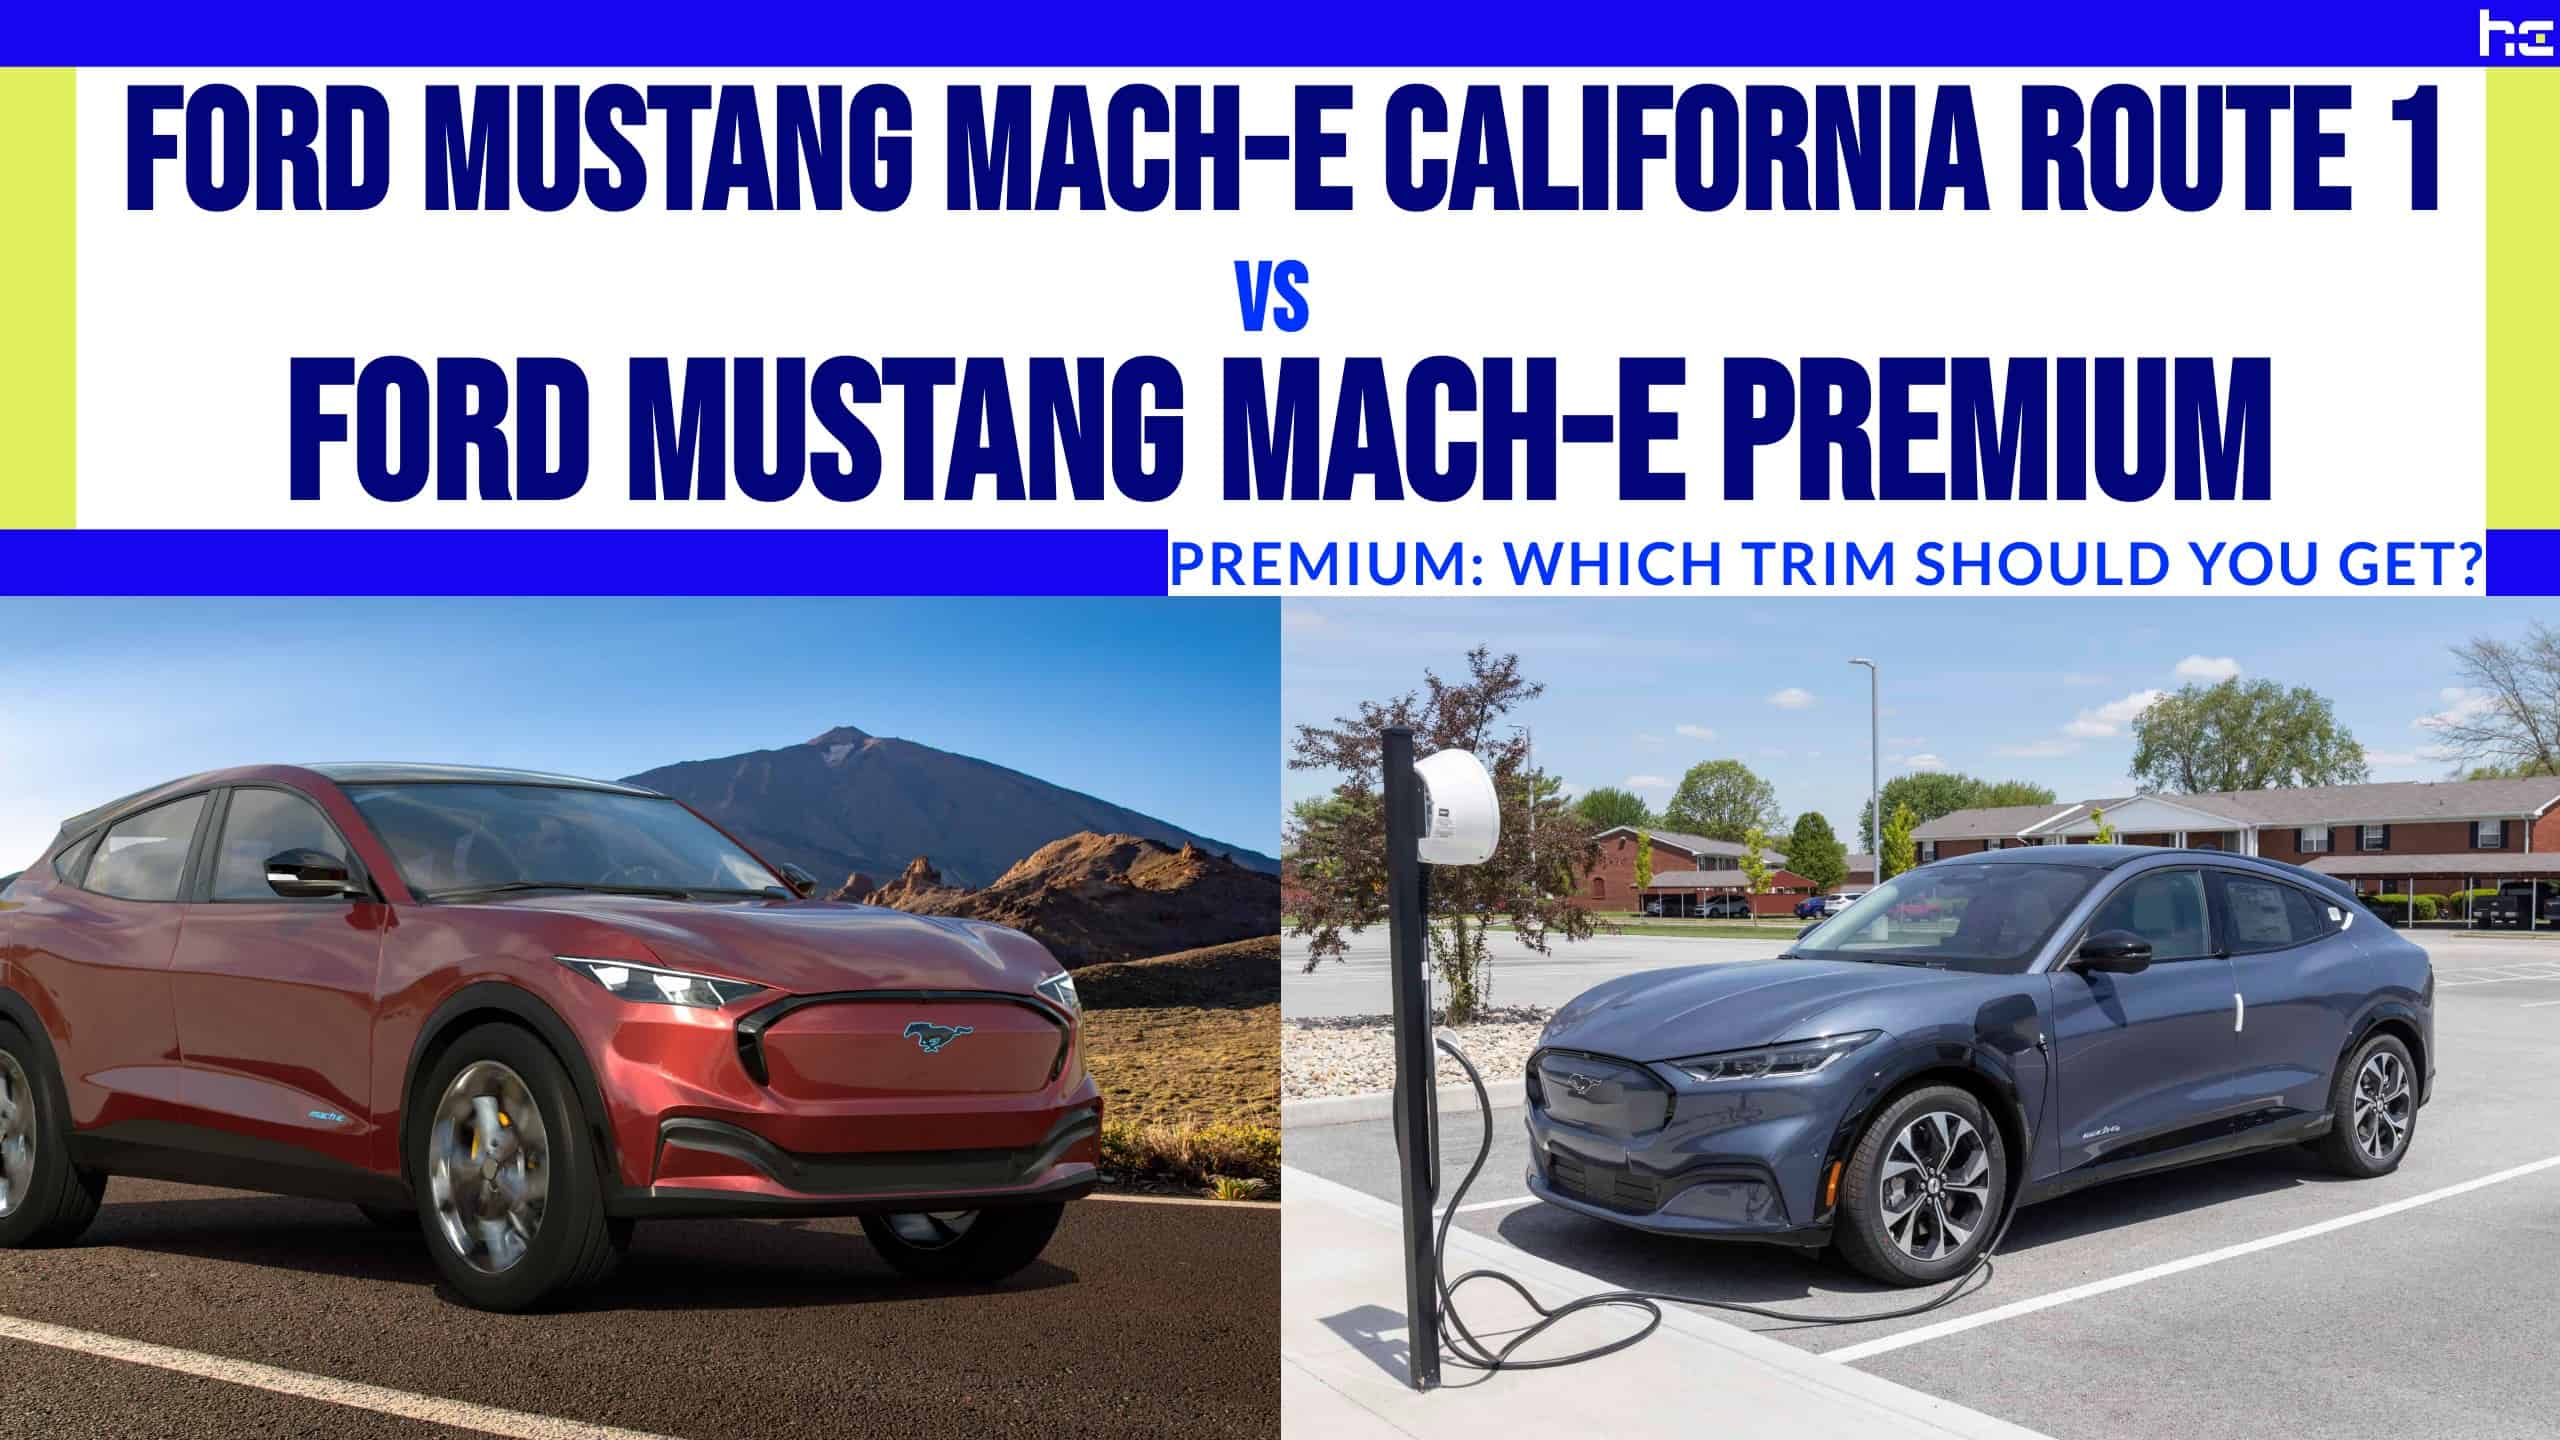 Ford Mustang Mach-E California Route 1 vs Ford Mustang Mach-E Premium featured image